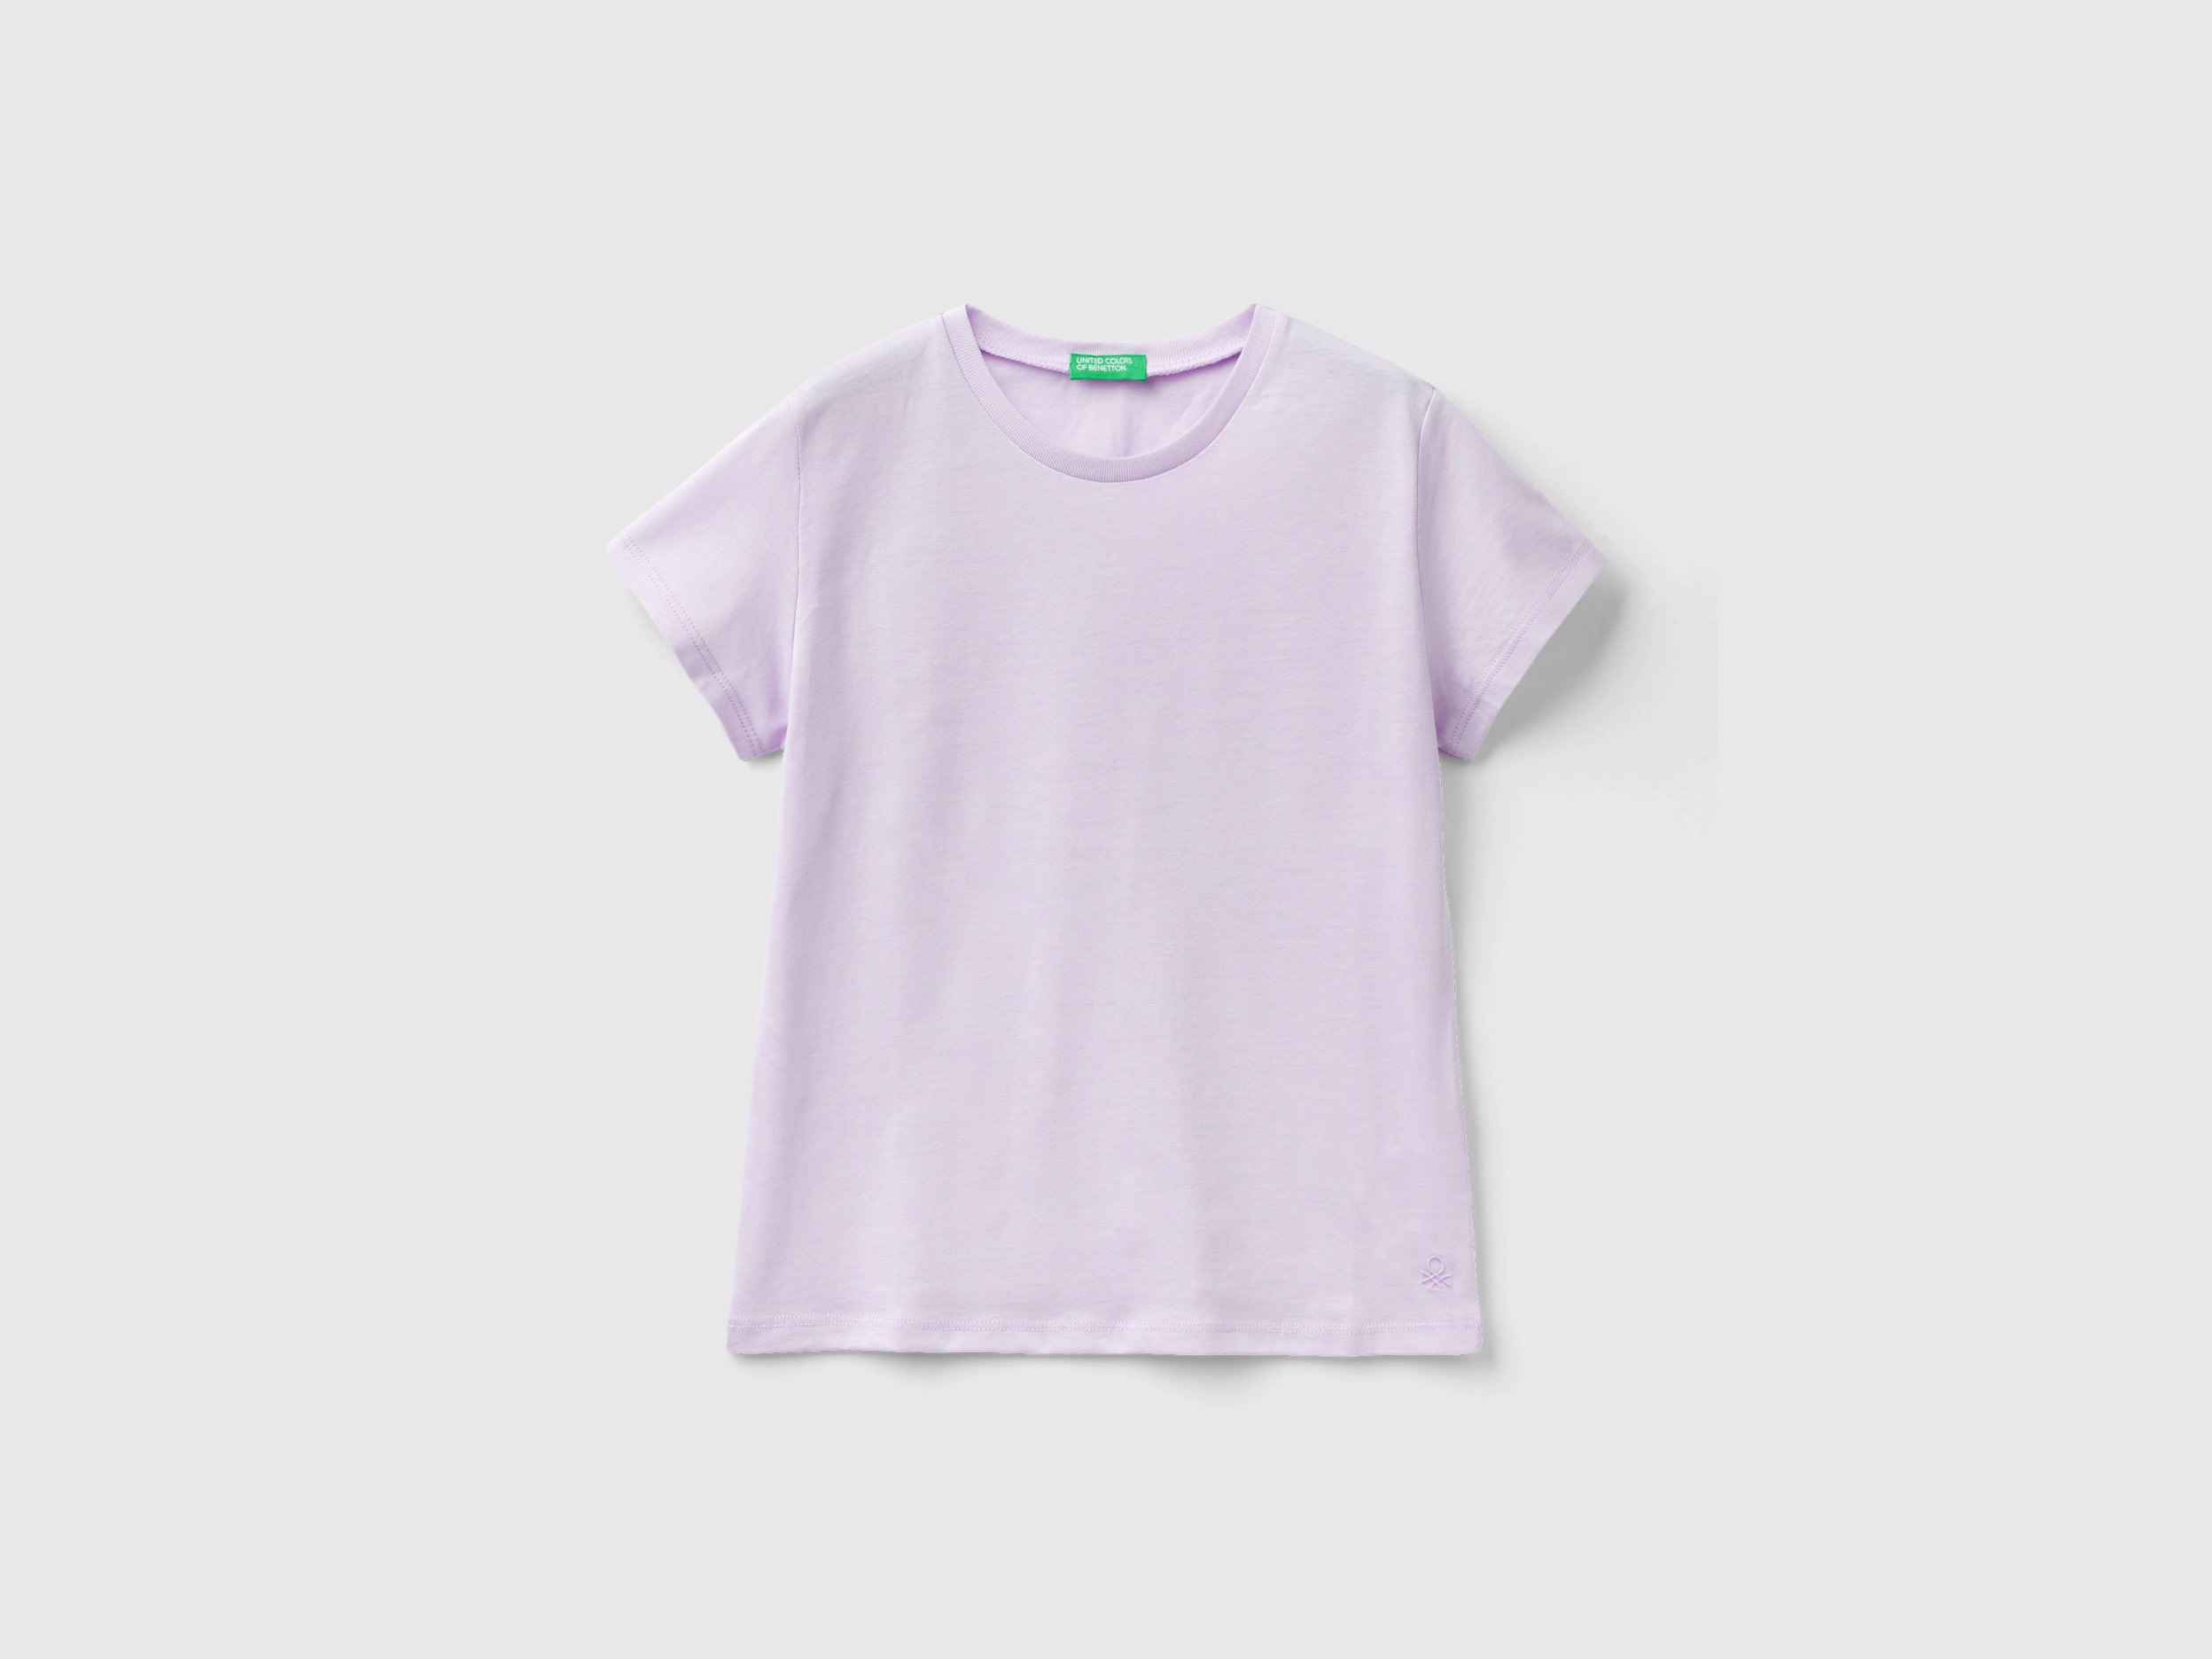 Image of Benetton, T-shirt In Pure Organic Cotton, size XL, Lilac, Kids